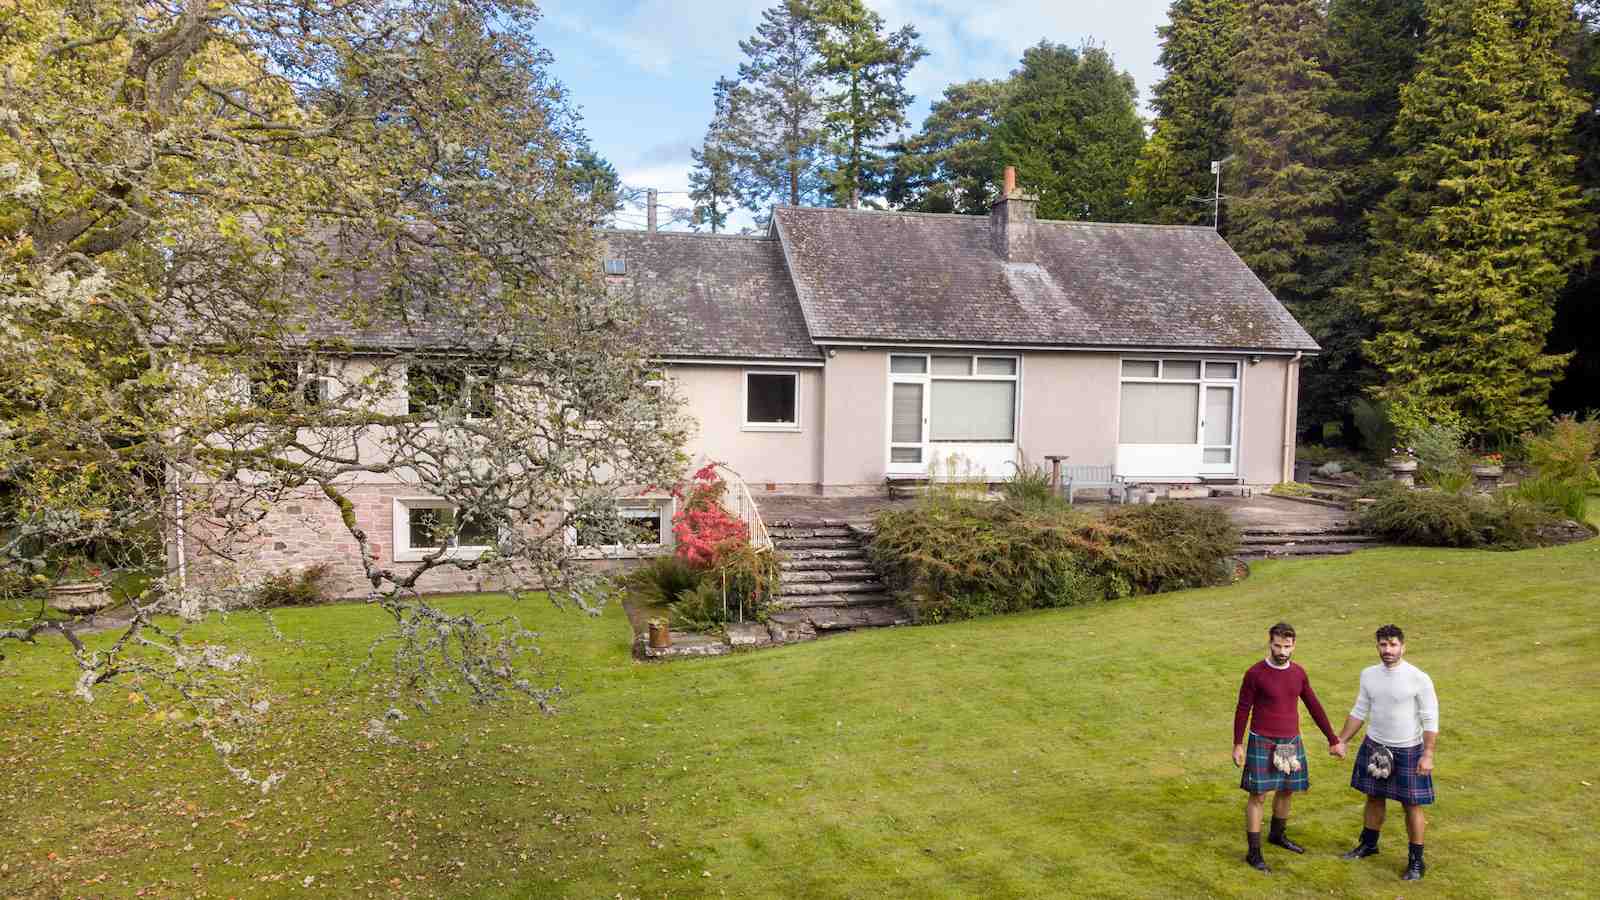 Deanspark guesthouse is a charming and gay friendly spot to stay in Scotland near Scone Palace